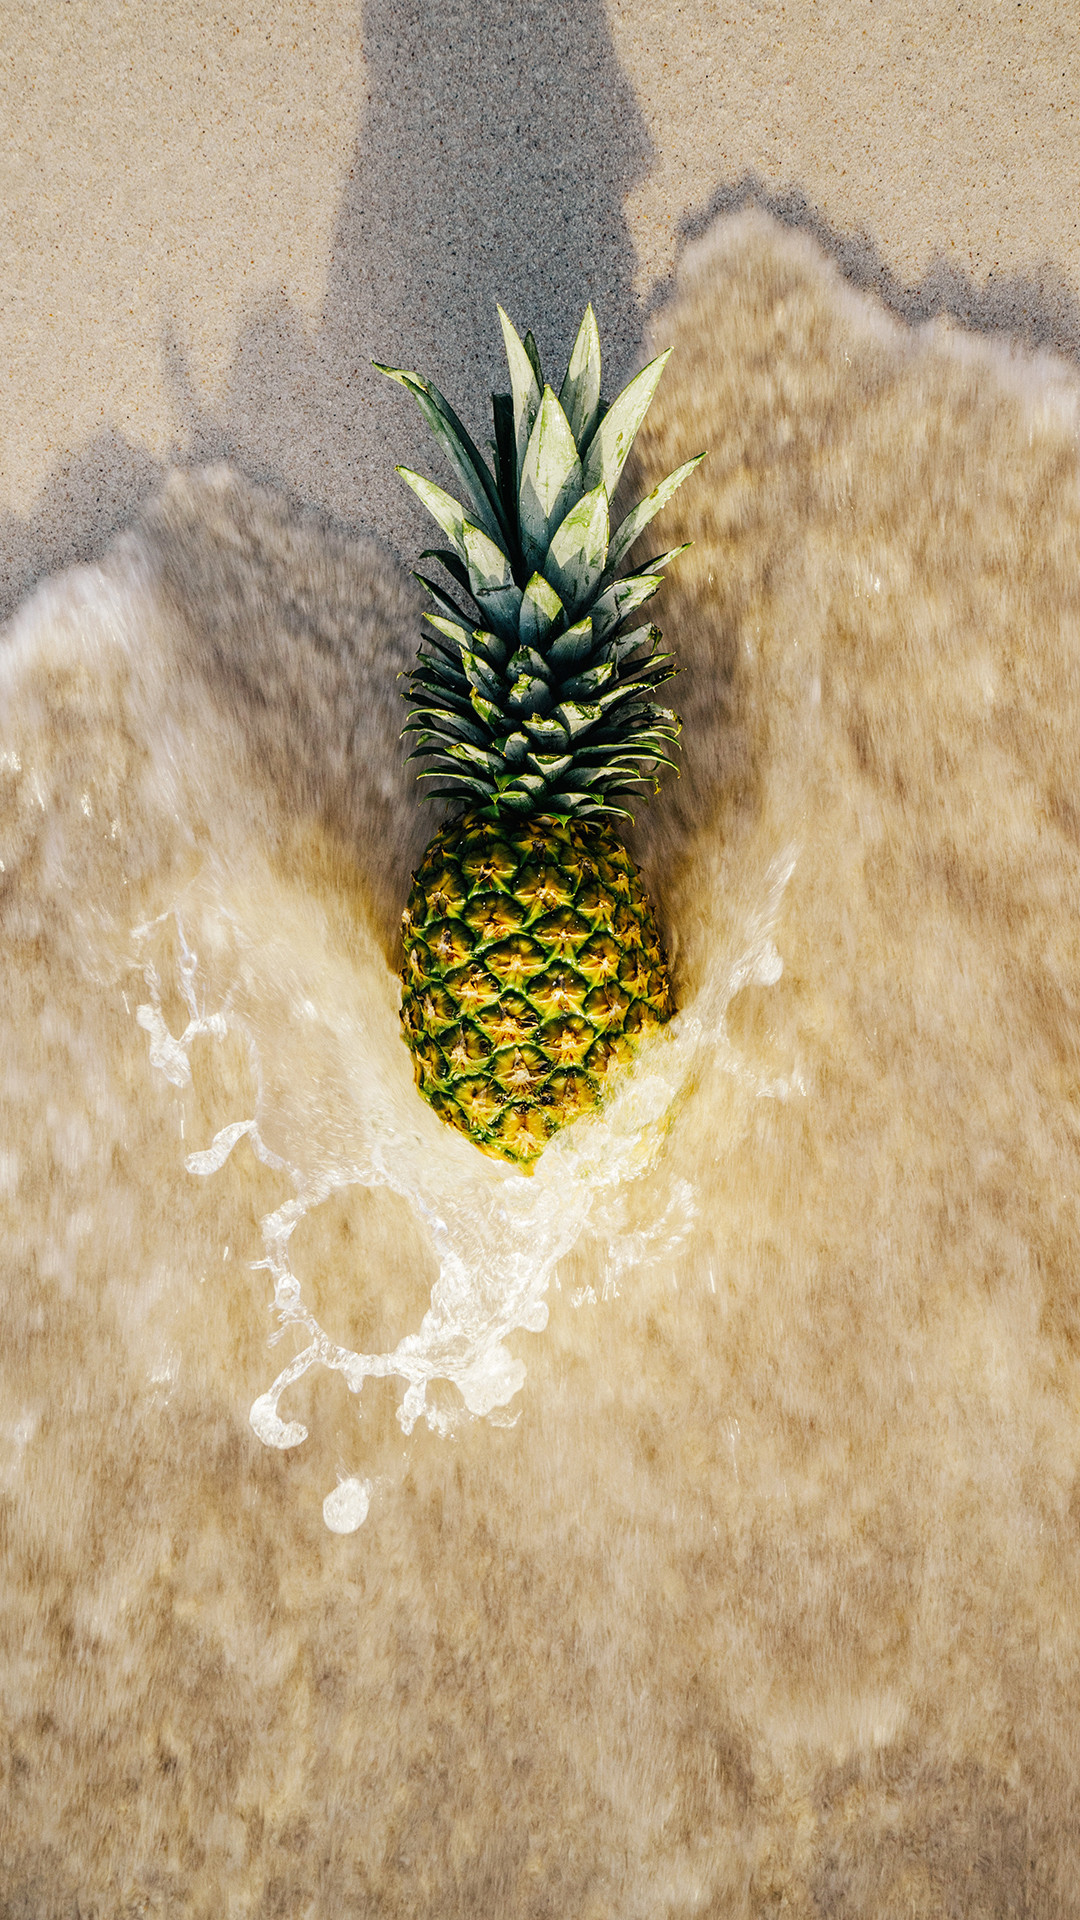 1080x1920 Download this rad pineapple wallpaper for your iPhone